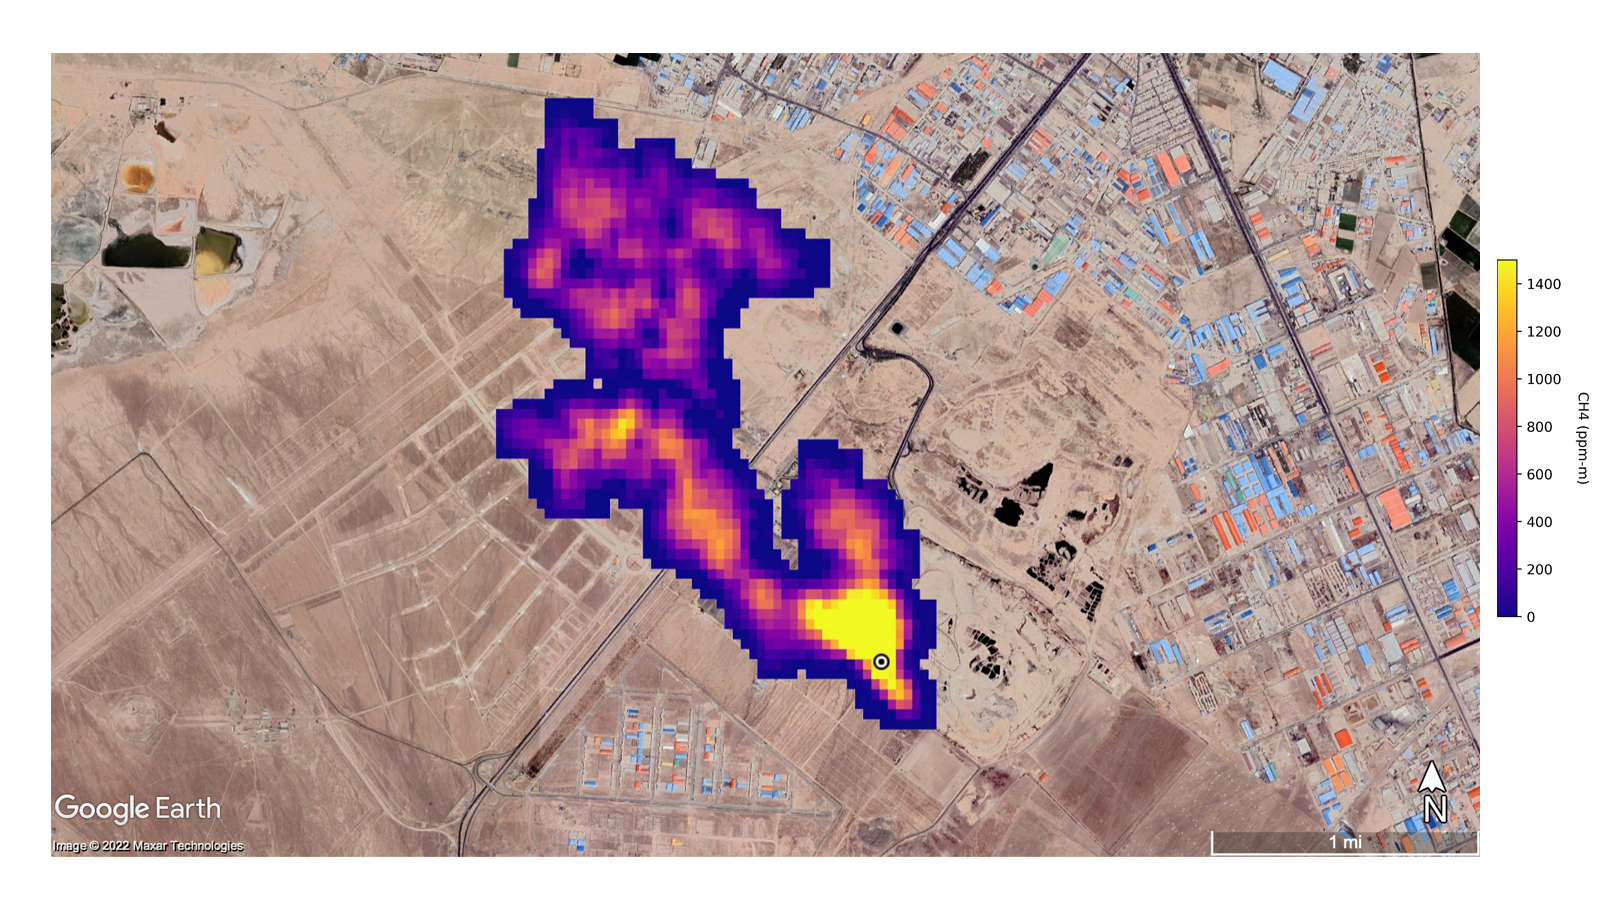 A methane plume at least 3 miles (4.8 kilometers) long rises into the atmosphere south of Tehran, Iran.  The plume, detected by NASA's Surface Mineral Dust Sources Research mission, comes from a major landfill, where methane is a byproduct of decay.